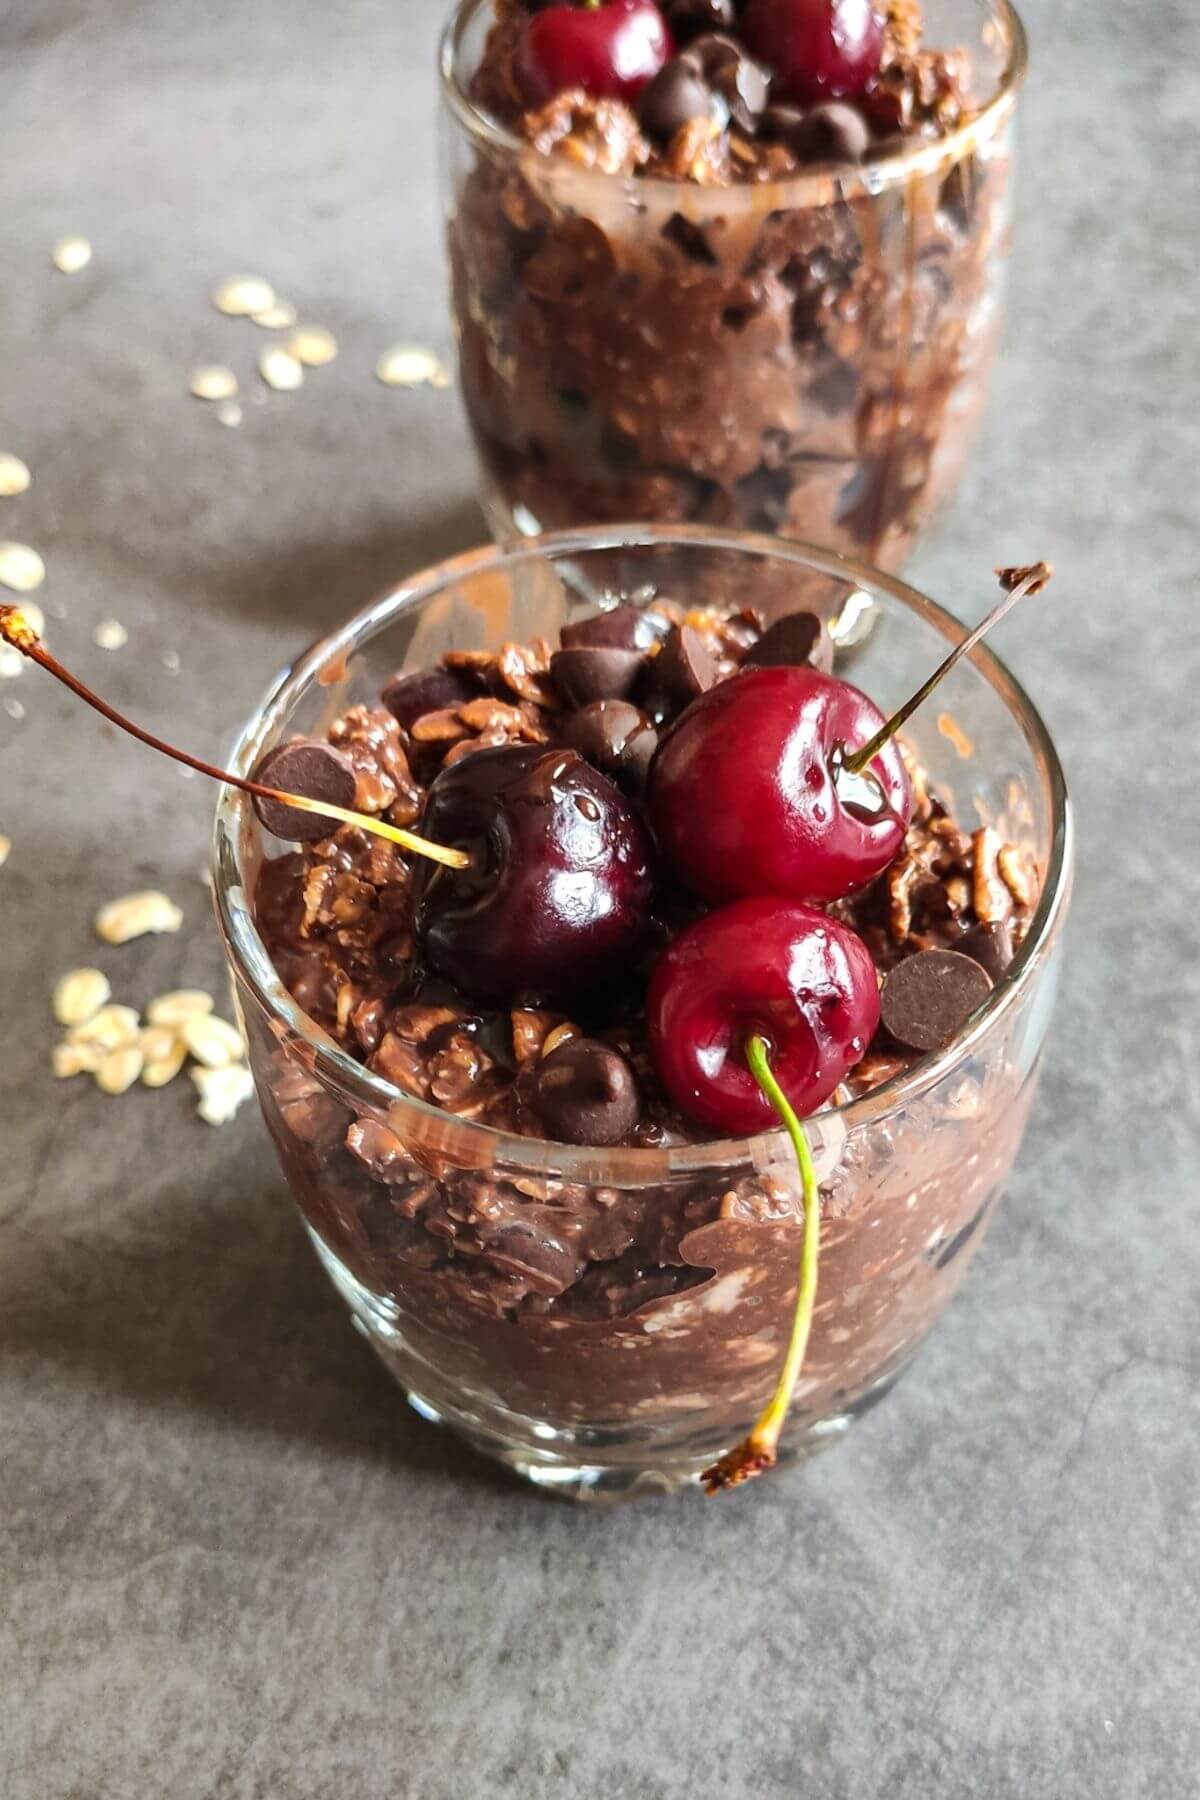 A bowl of vegan chocolate overnight oats garnished with cherries another bowl in the background